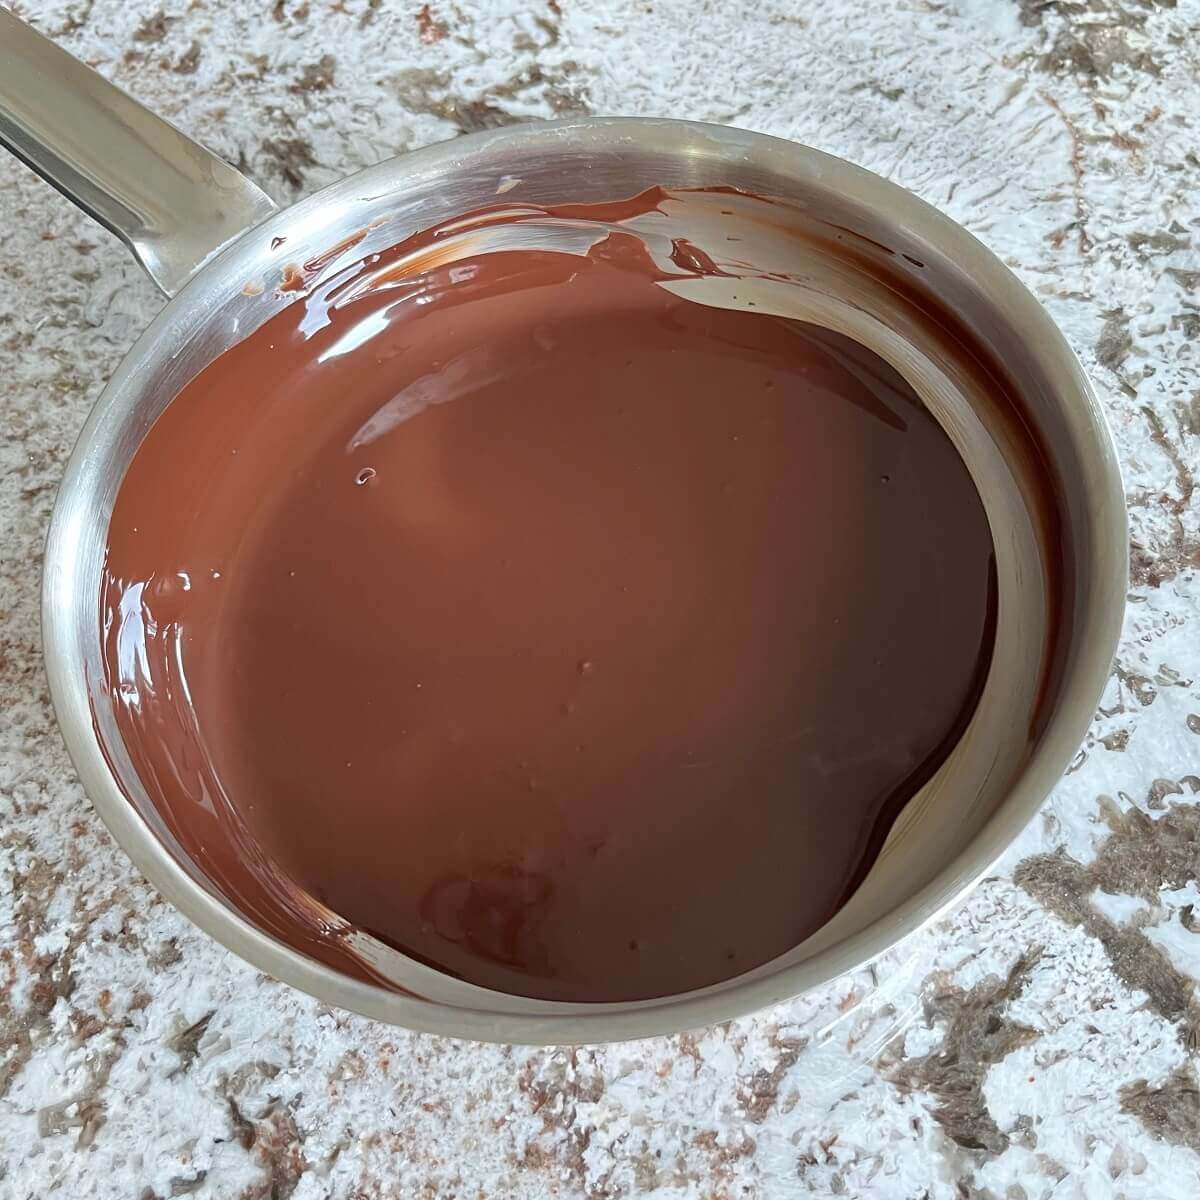 Melted chocolate in a stainless steel pan.